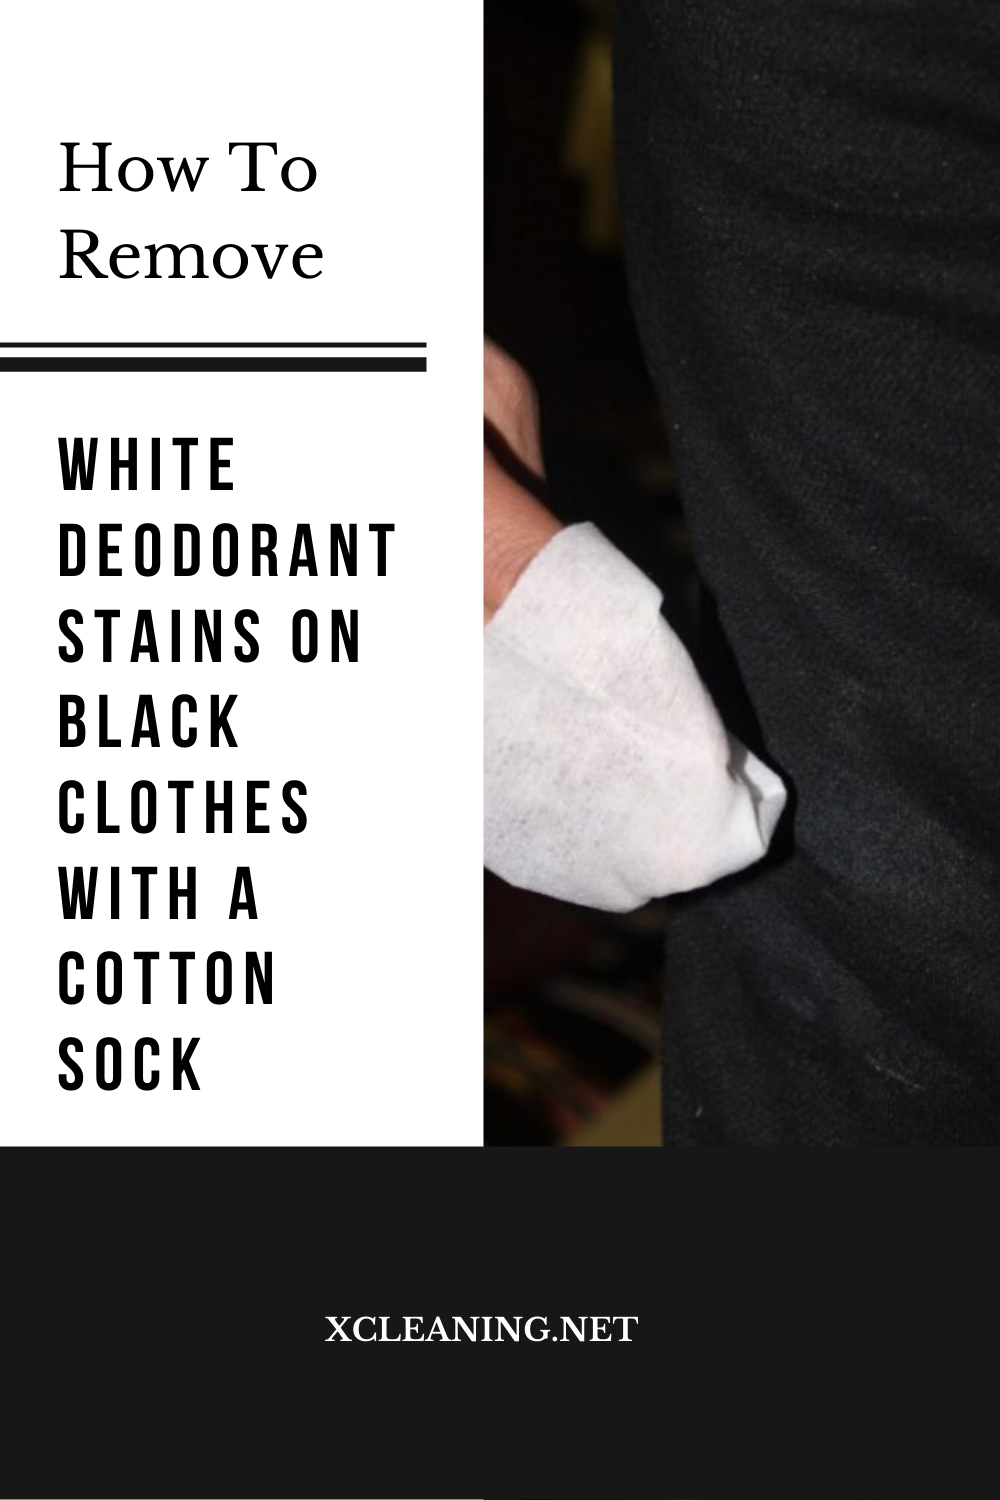 How To Remove White Deodorant Stains On Black Clothes With ...